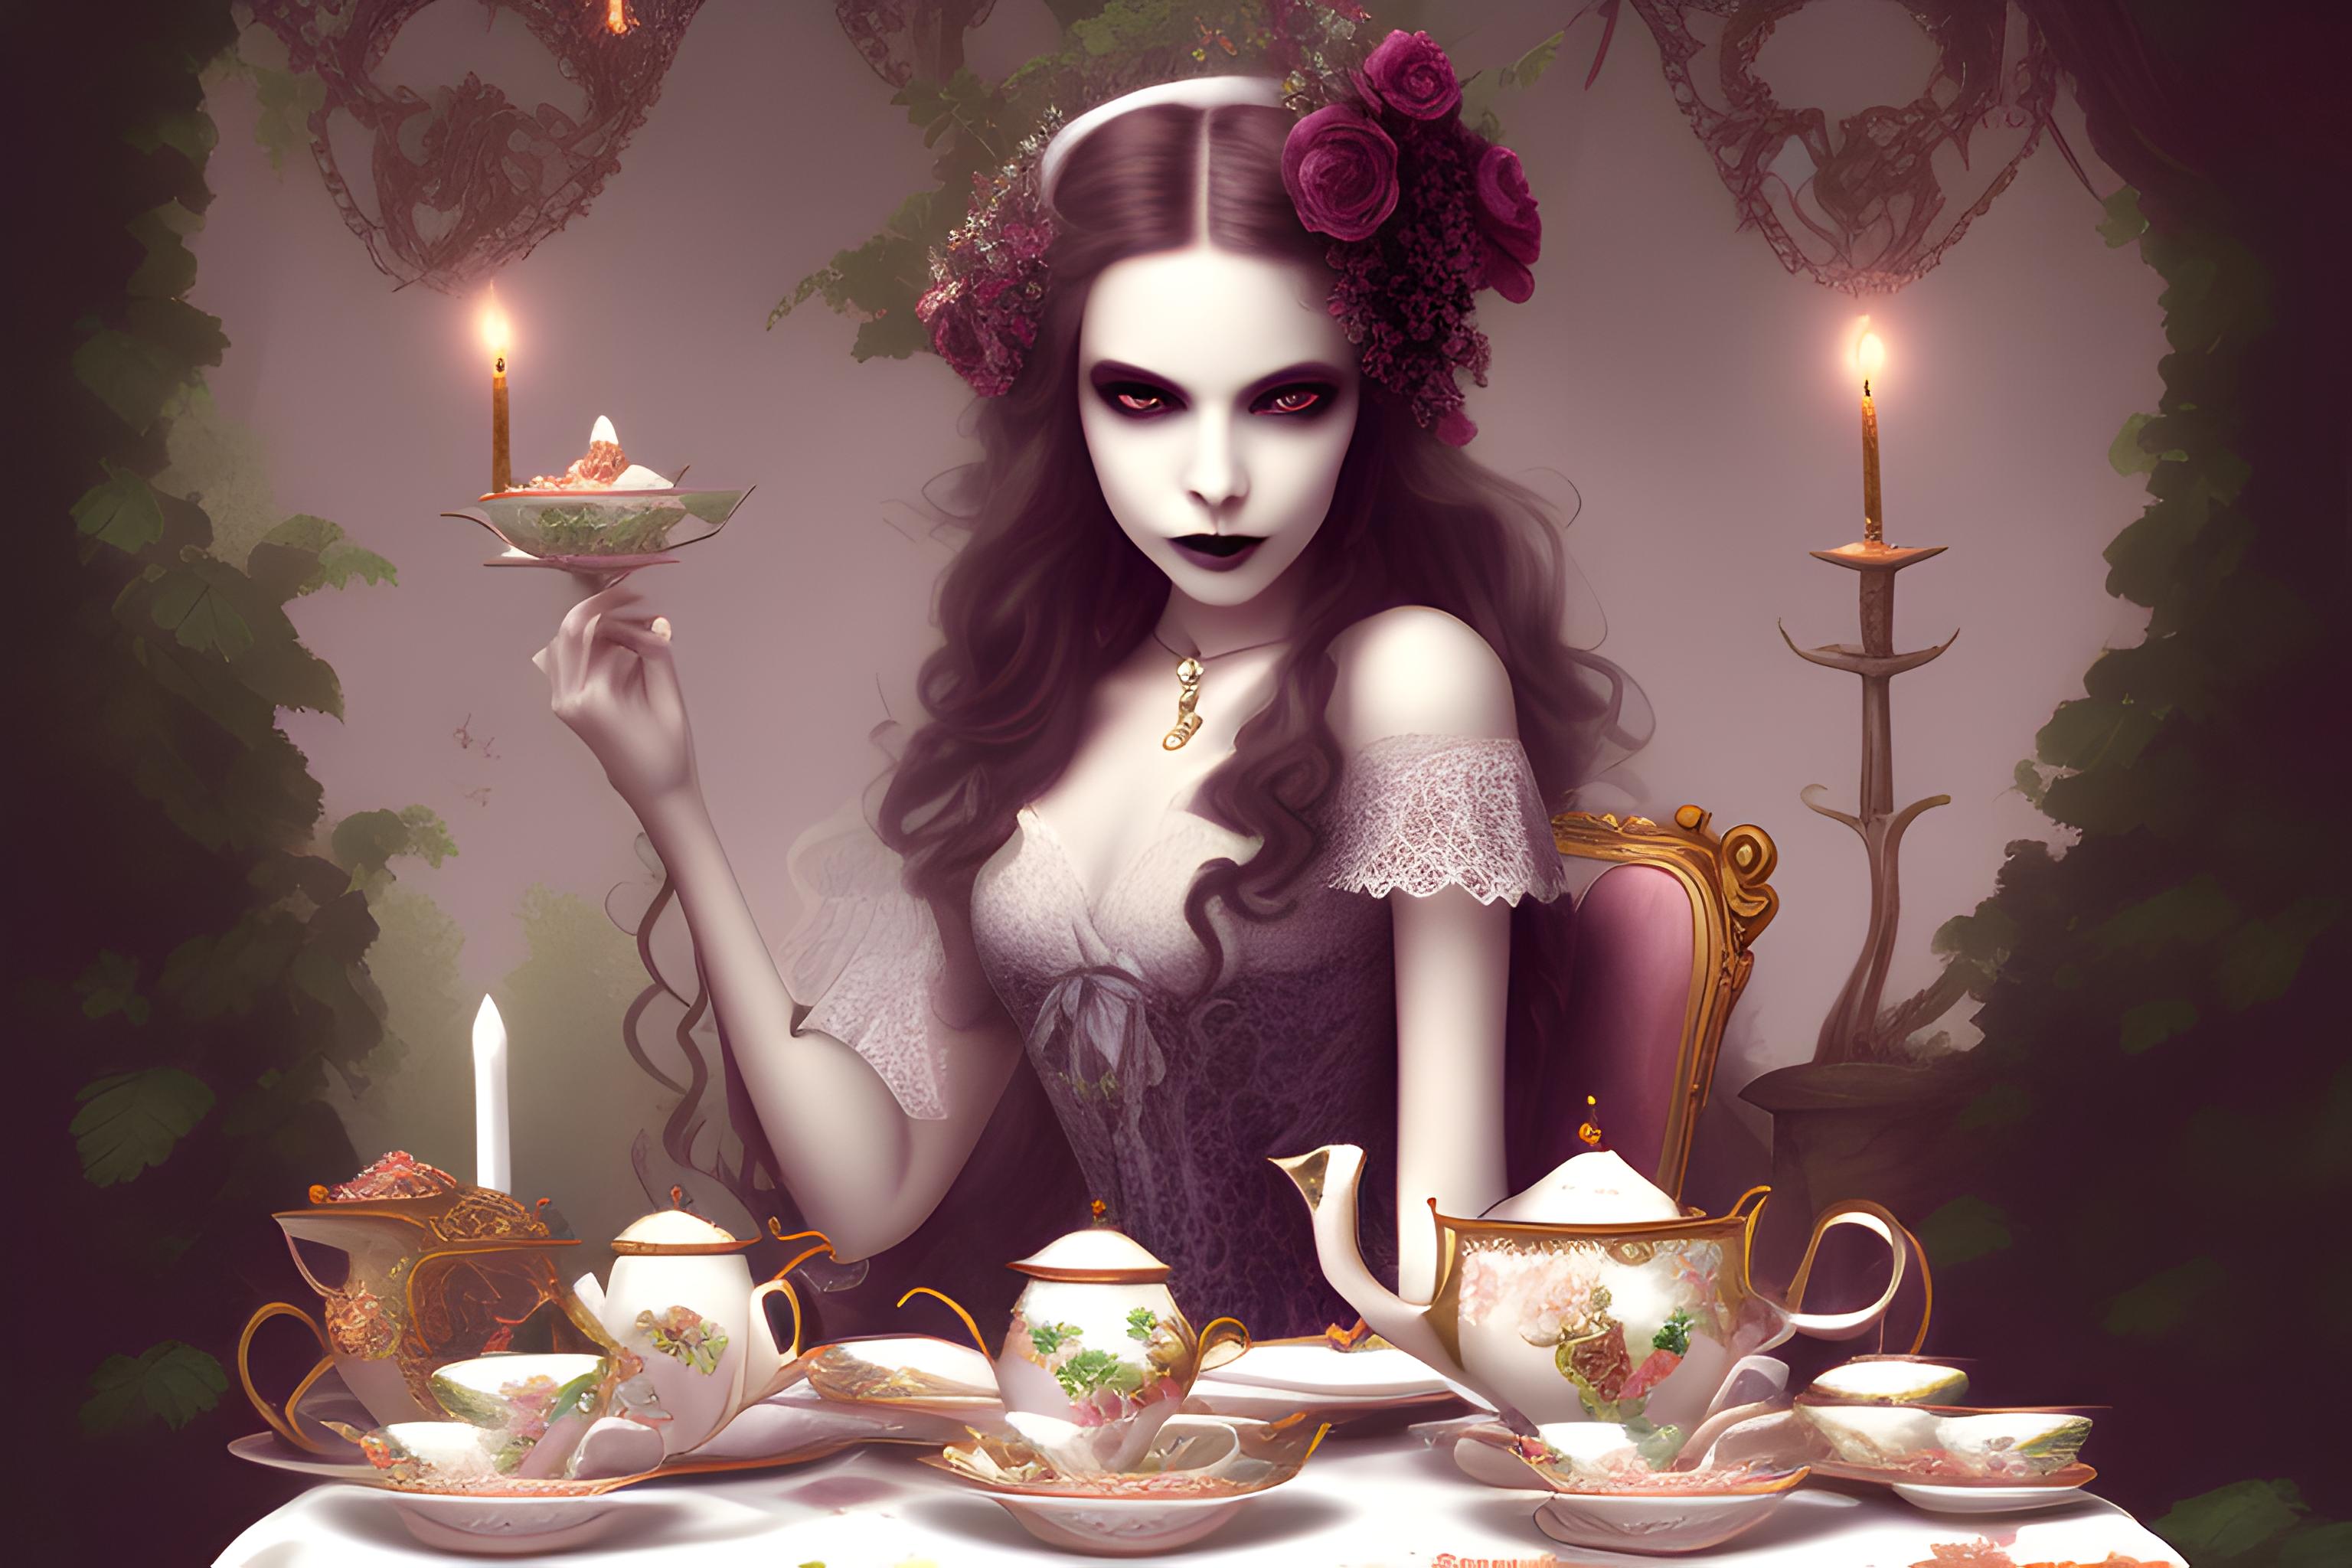 The Truth Behind Teacups and Saucers with TEA PARTY GIRL